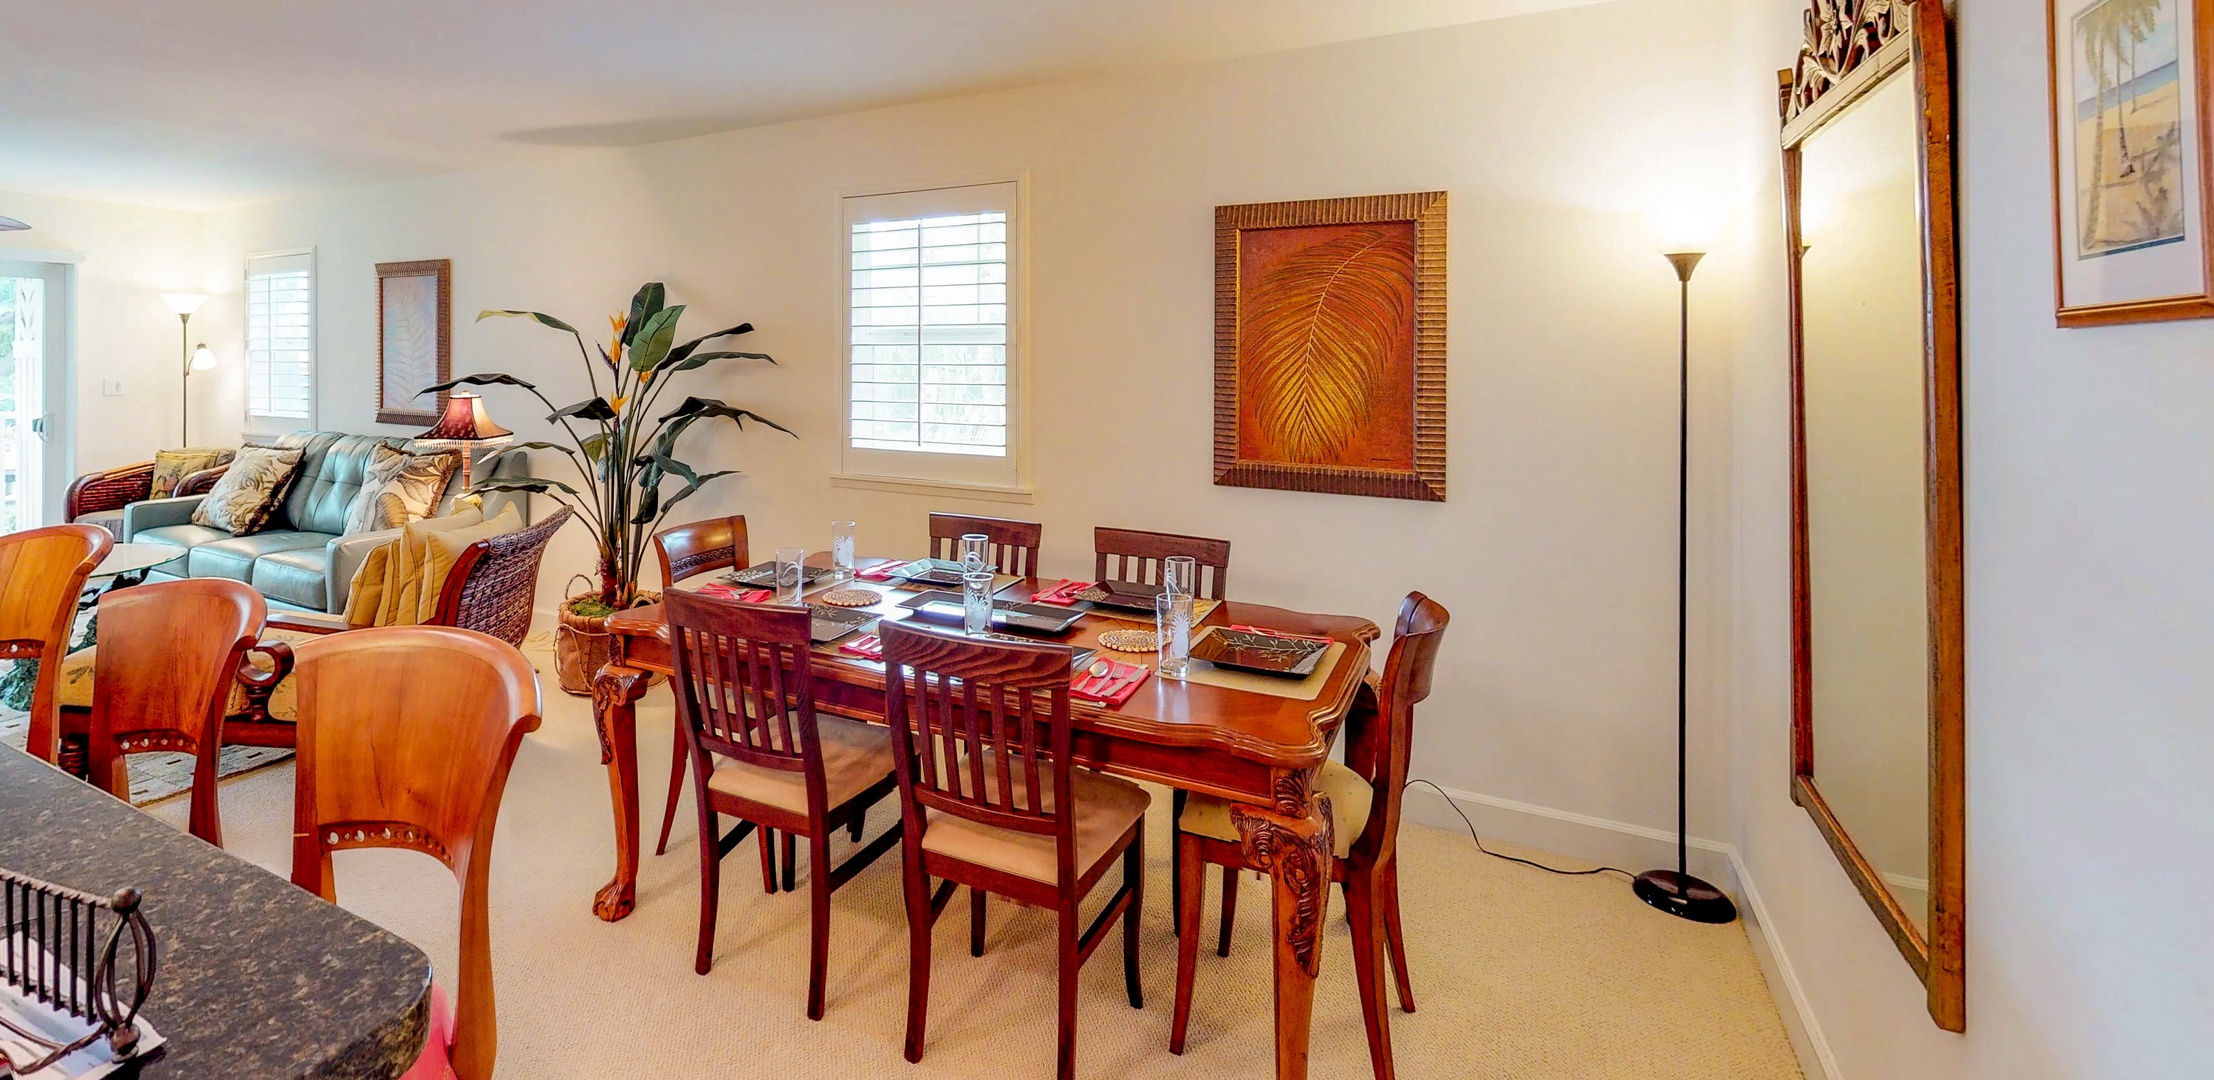 Kapolei Vacation Rentals, Ko Olina Kai 1105E - Rustic charm of the dining area with table for six.